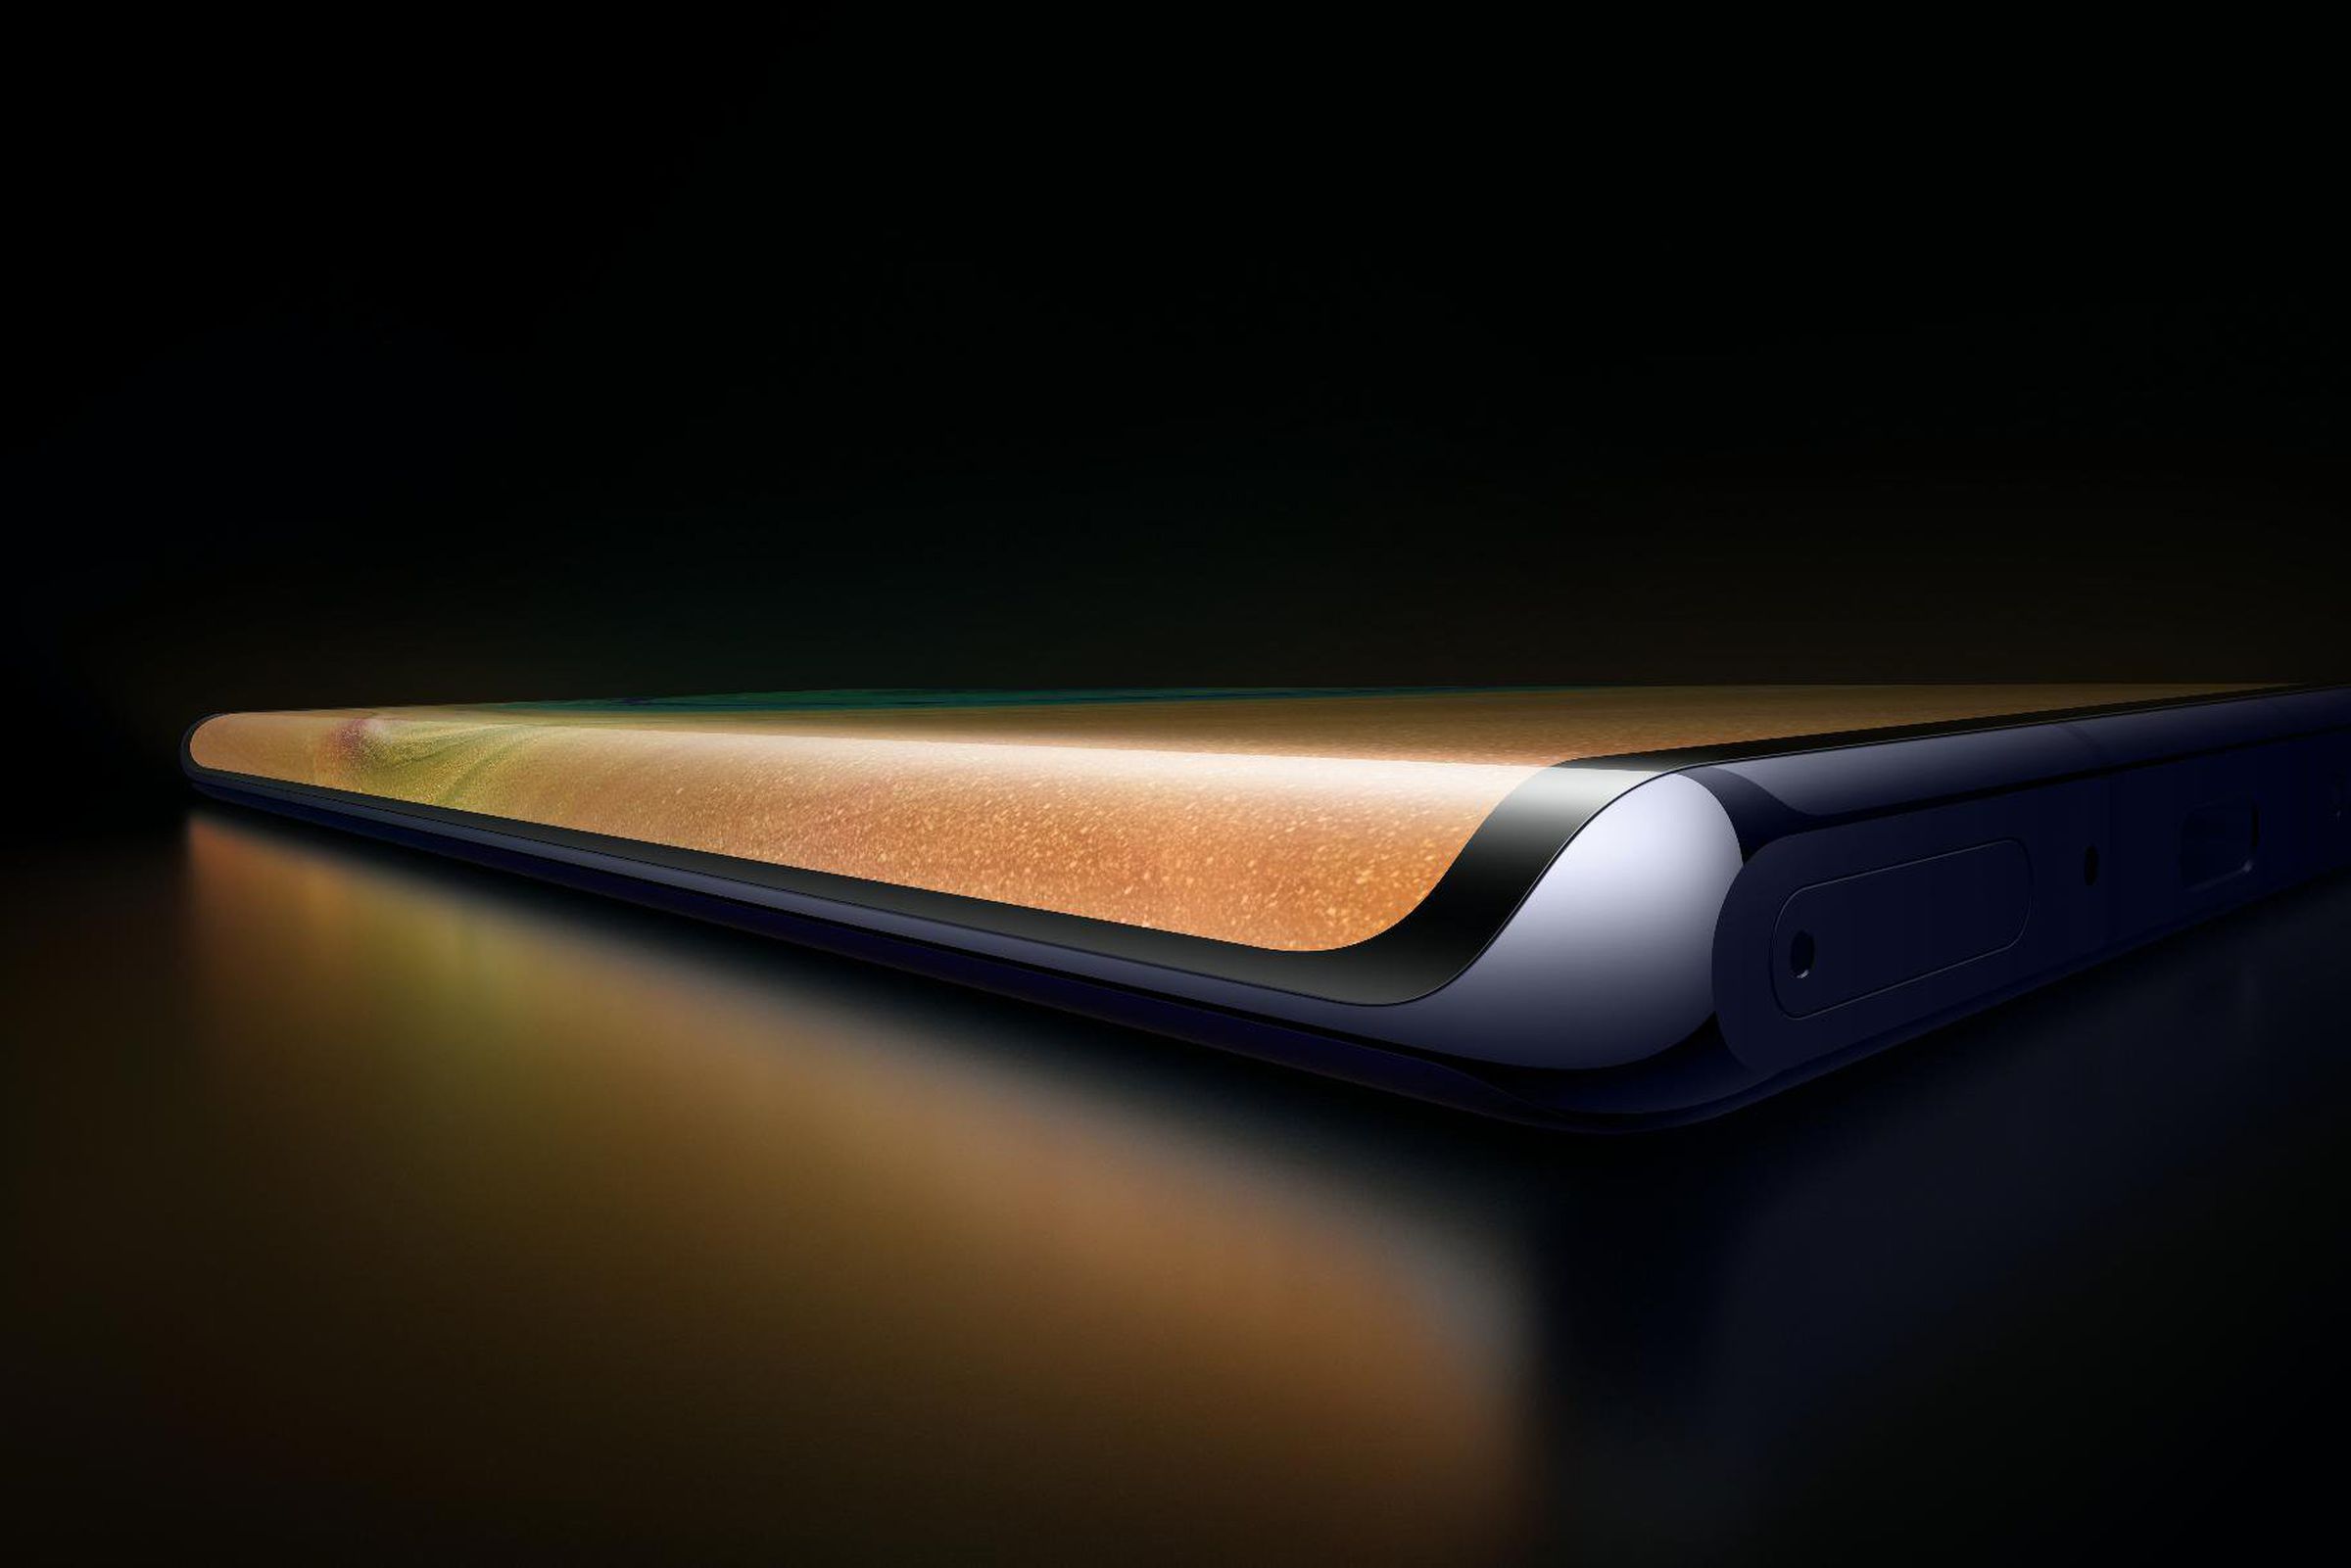 The Mate 30 Pro could have a screen that curves sharply around the edges of the device.